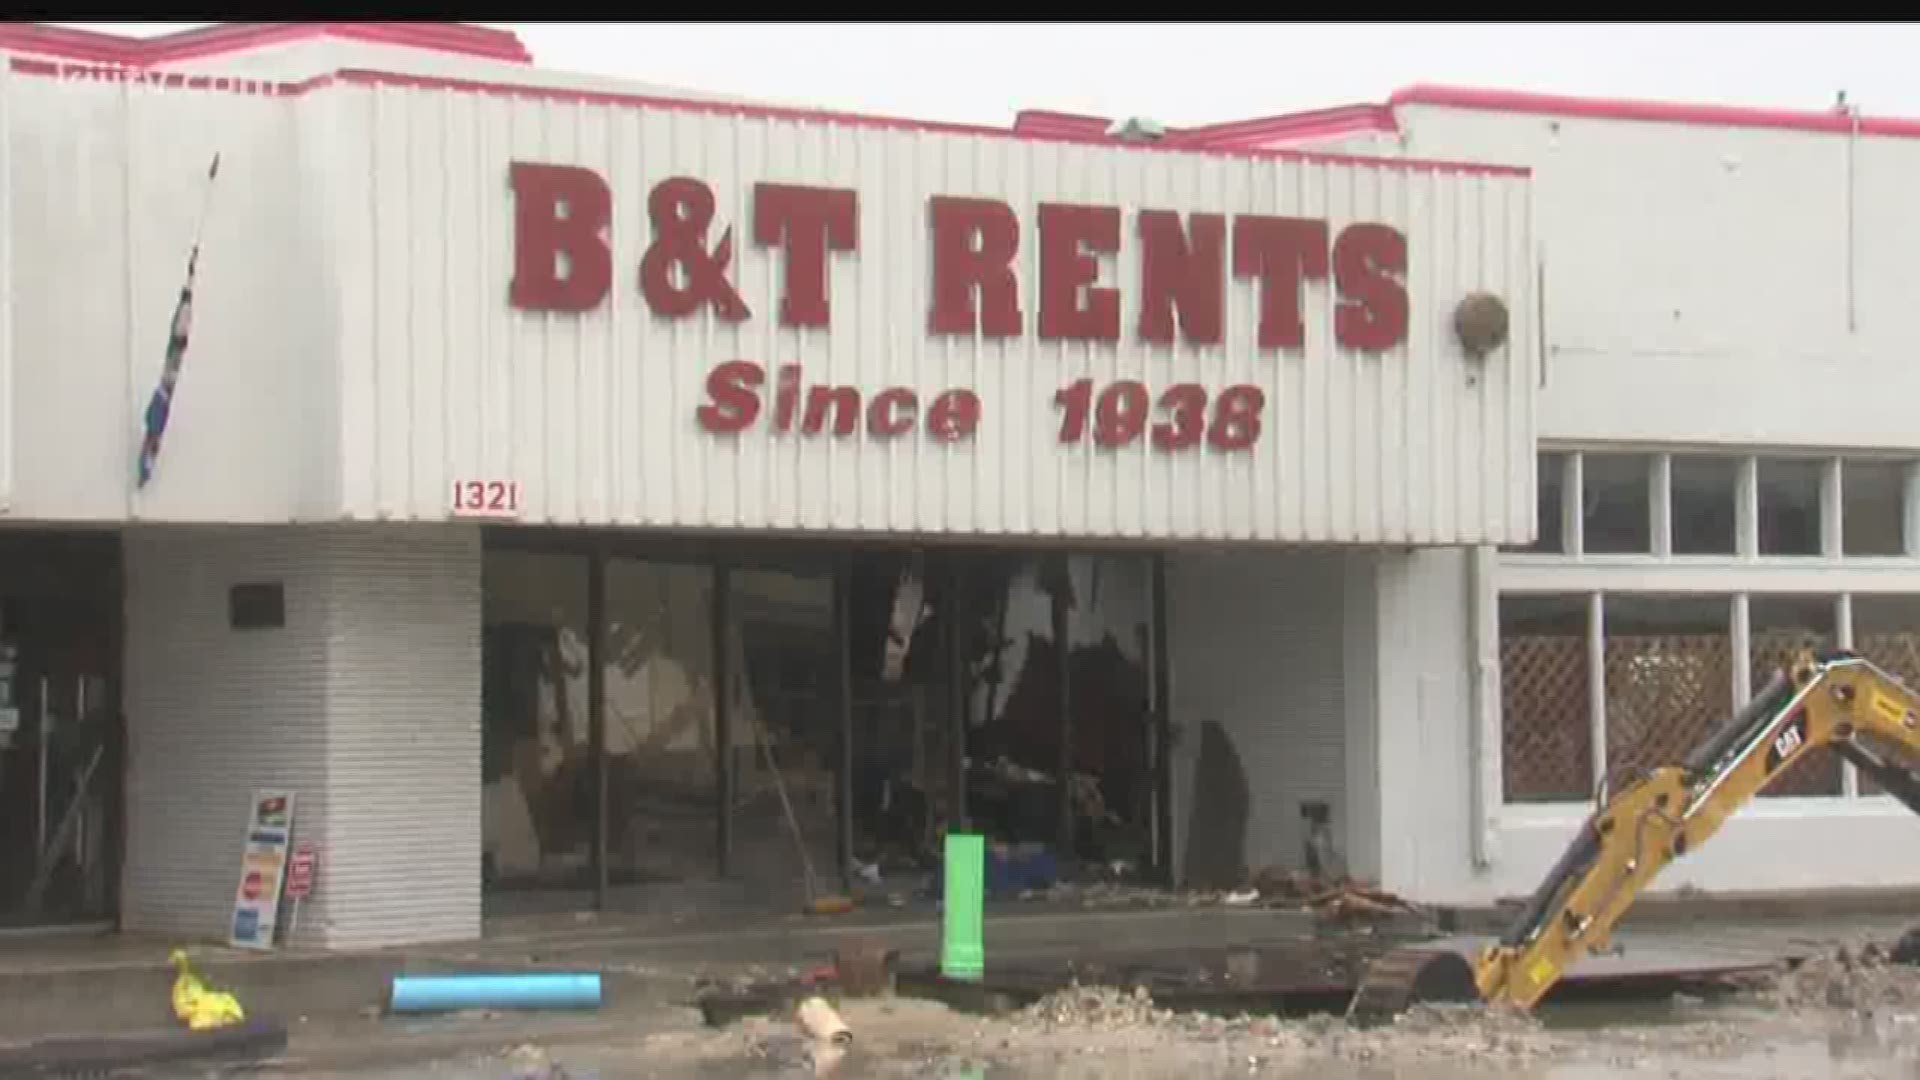 The business did suffer severe water damage to other parts of the building.